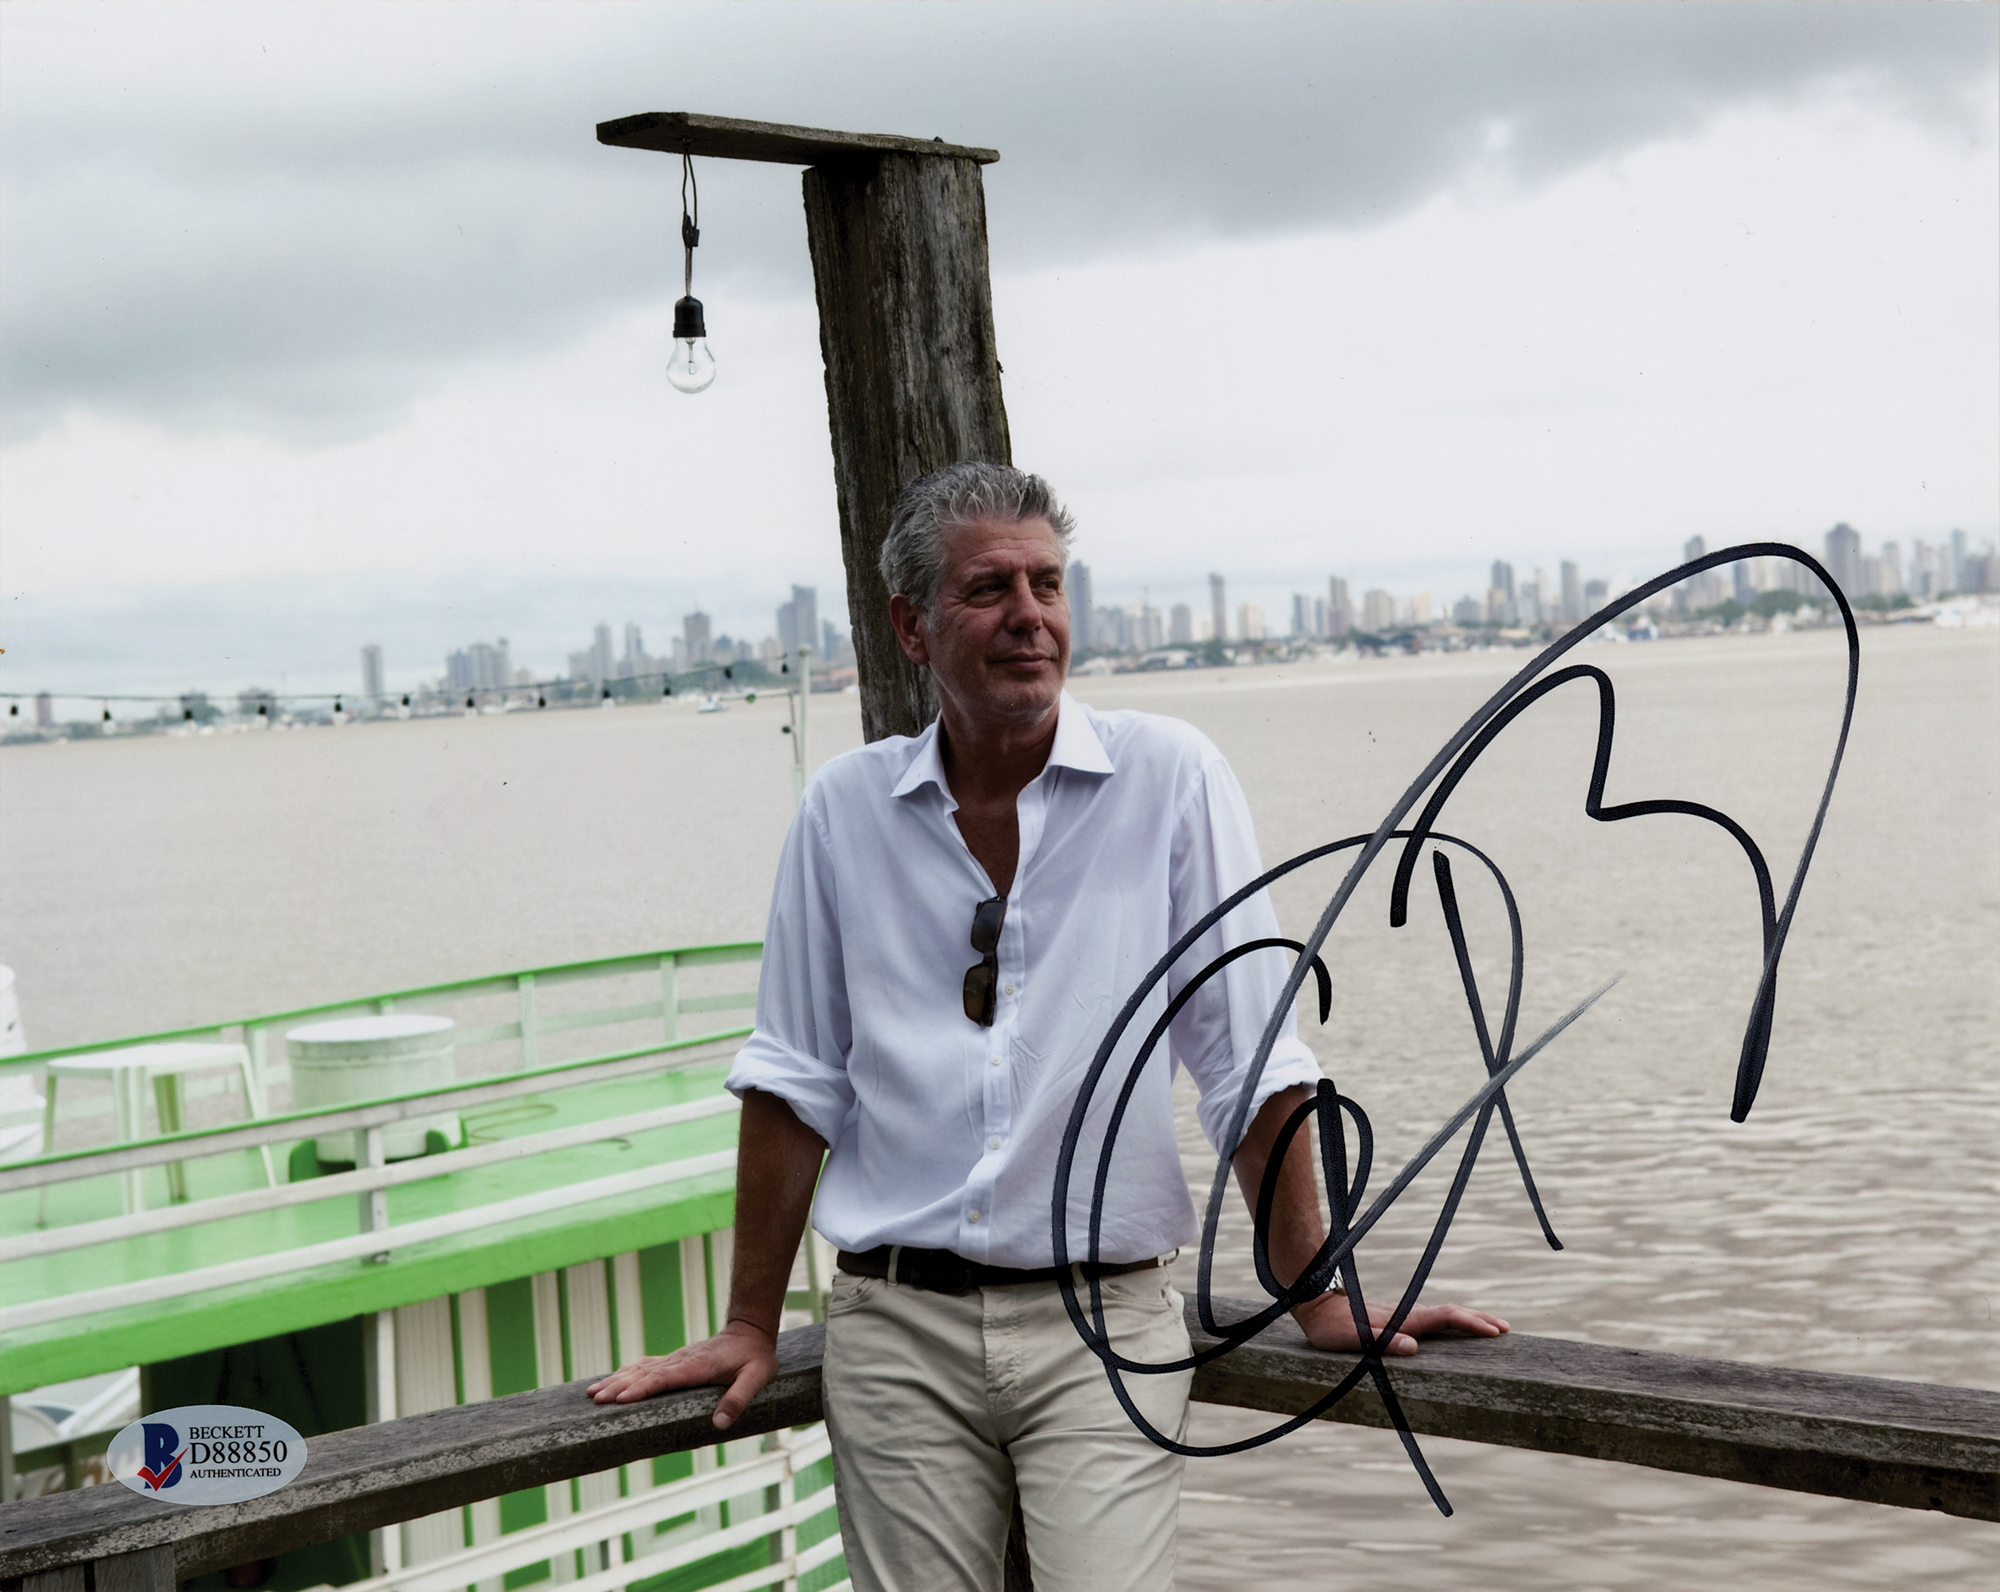 Anthony Bourdain Signed Photograph | RR Auction